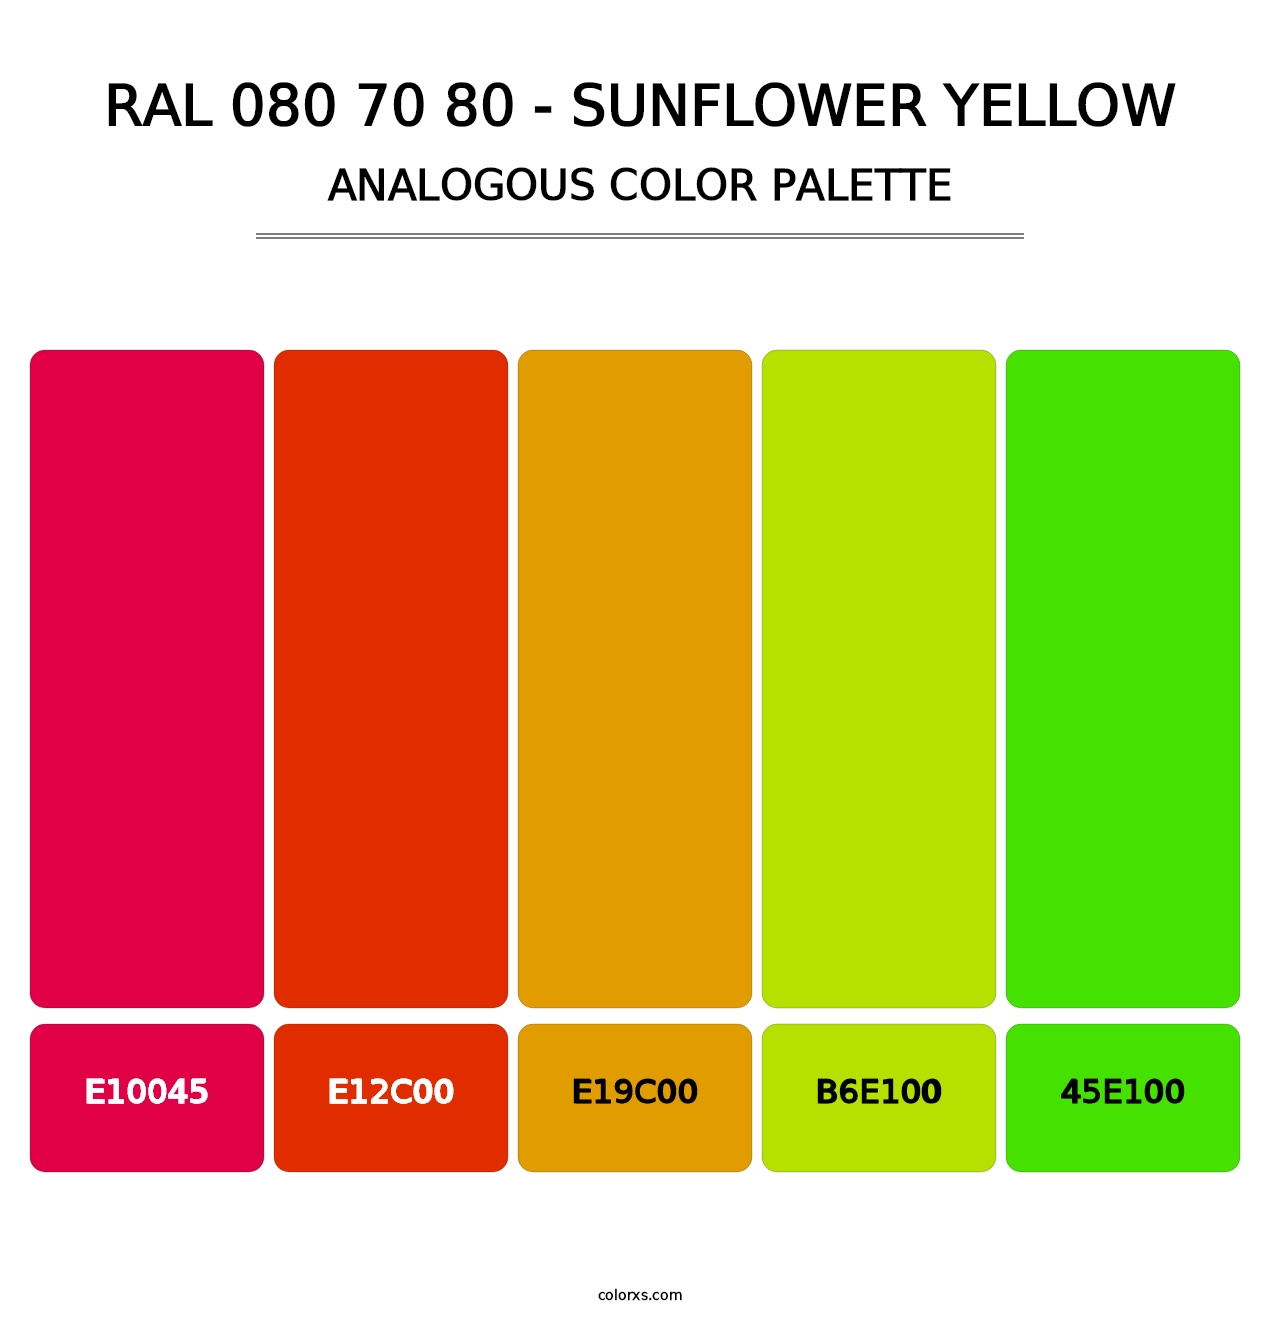 RAL 080 70 80 - Sunflower Yellow - Analogous Color Palette